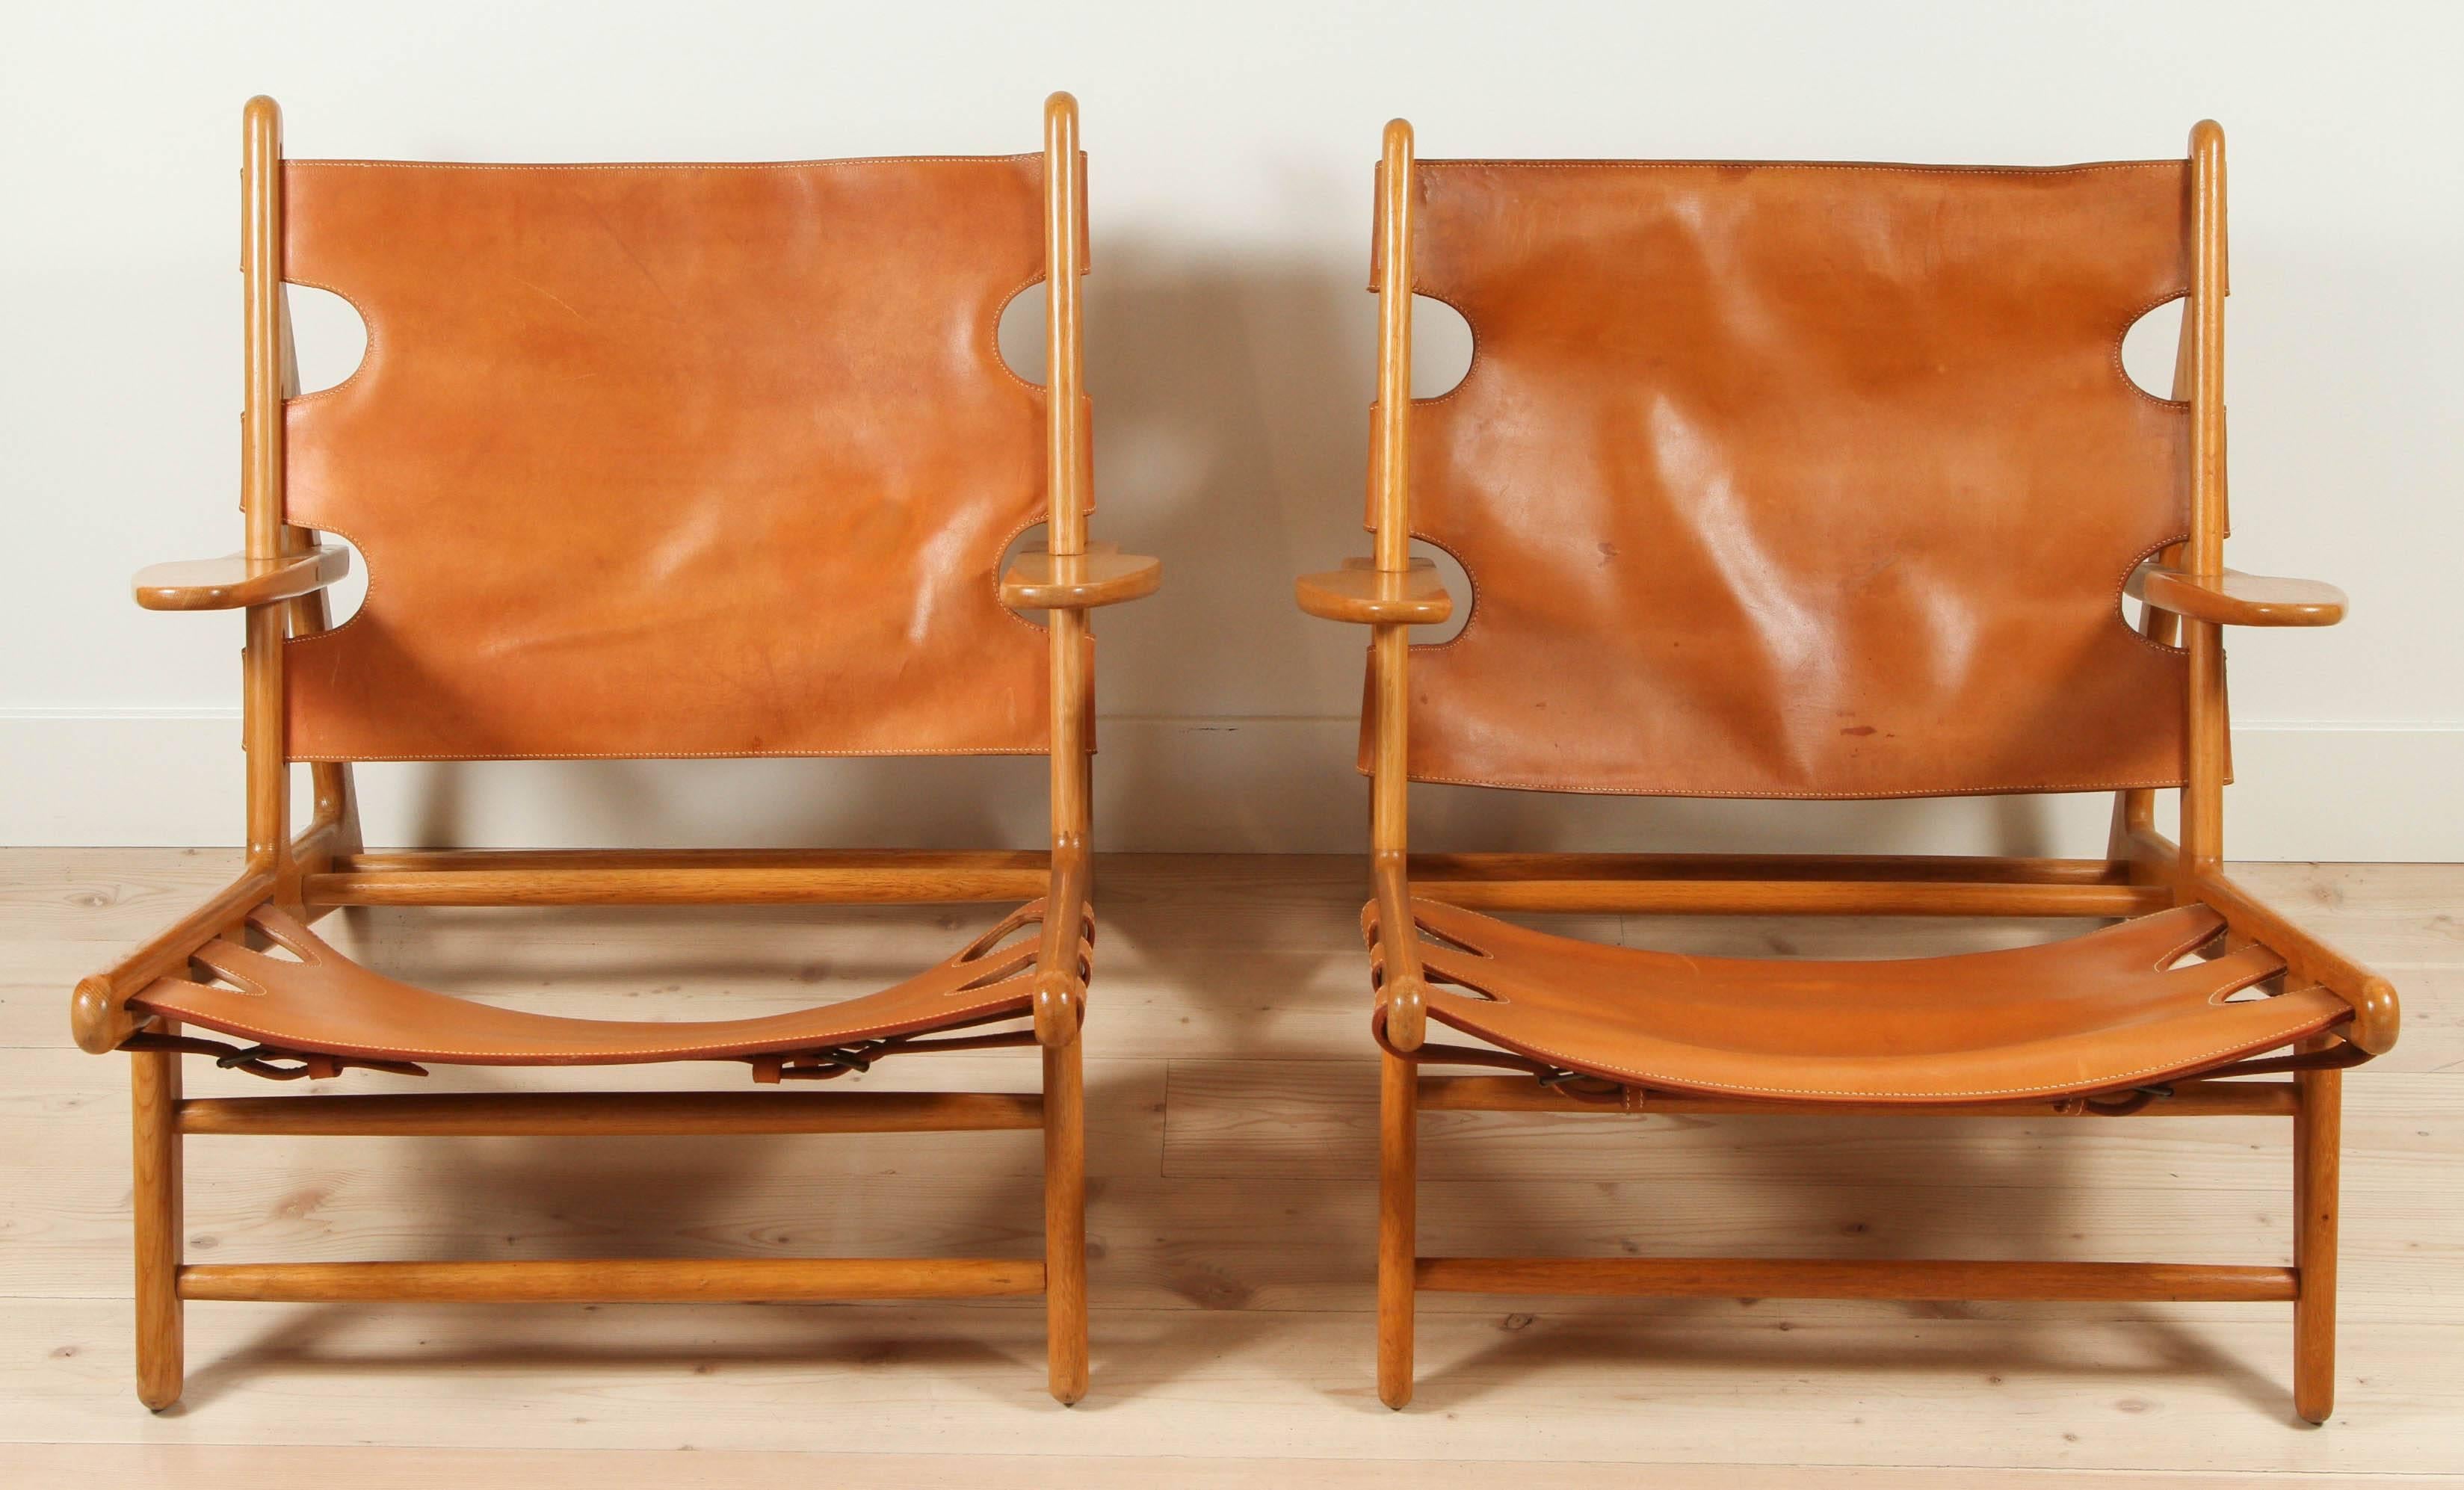 Pair of leather hunting chairs by Børge Mogensen.